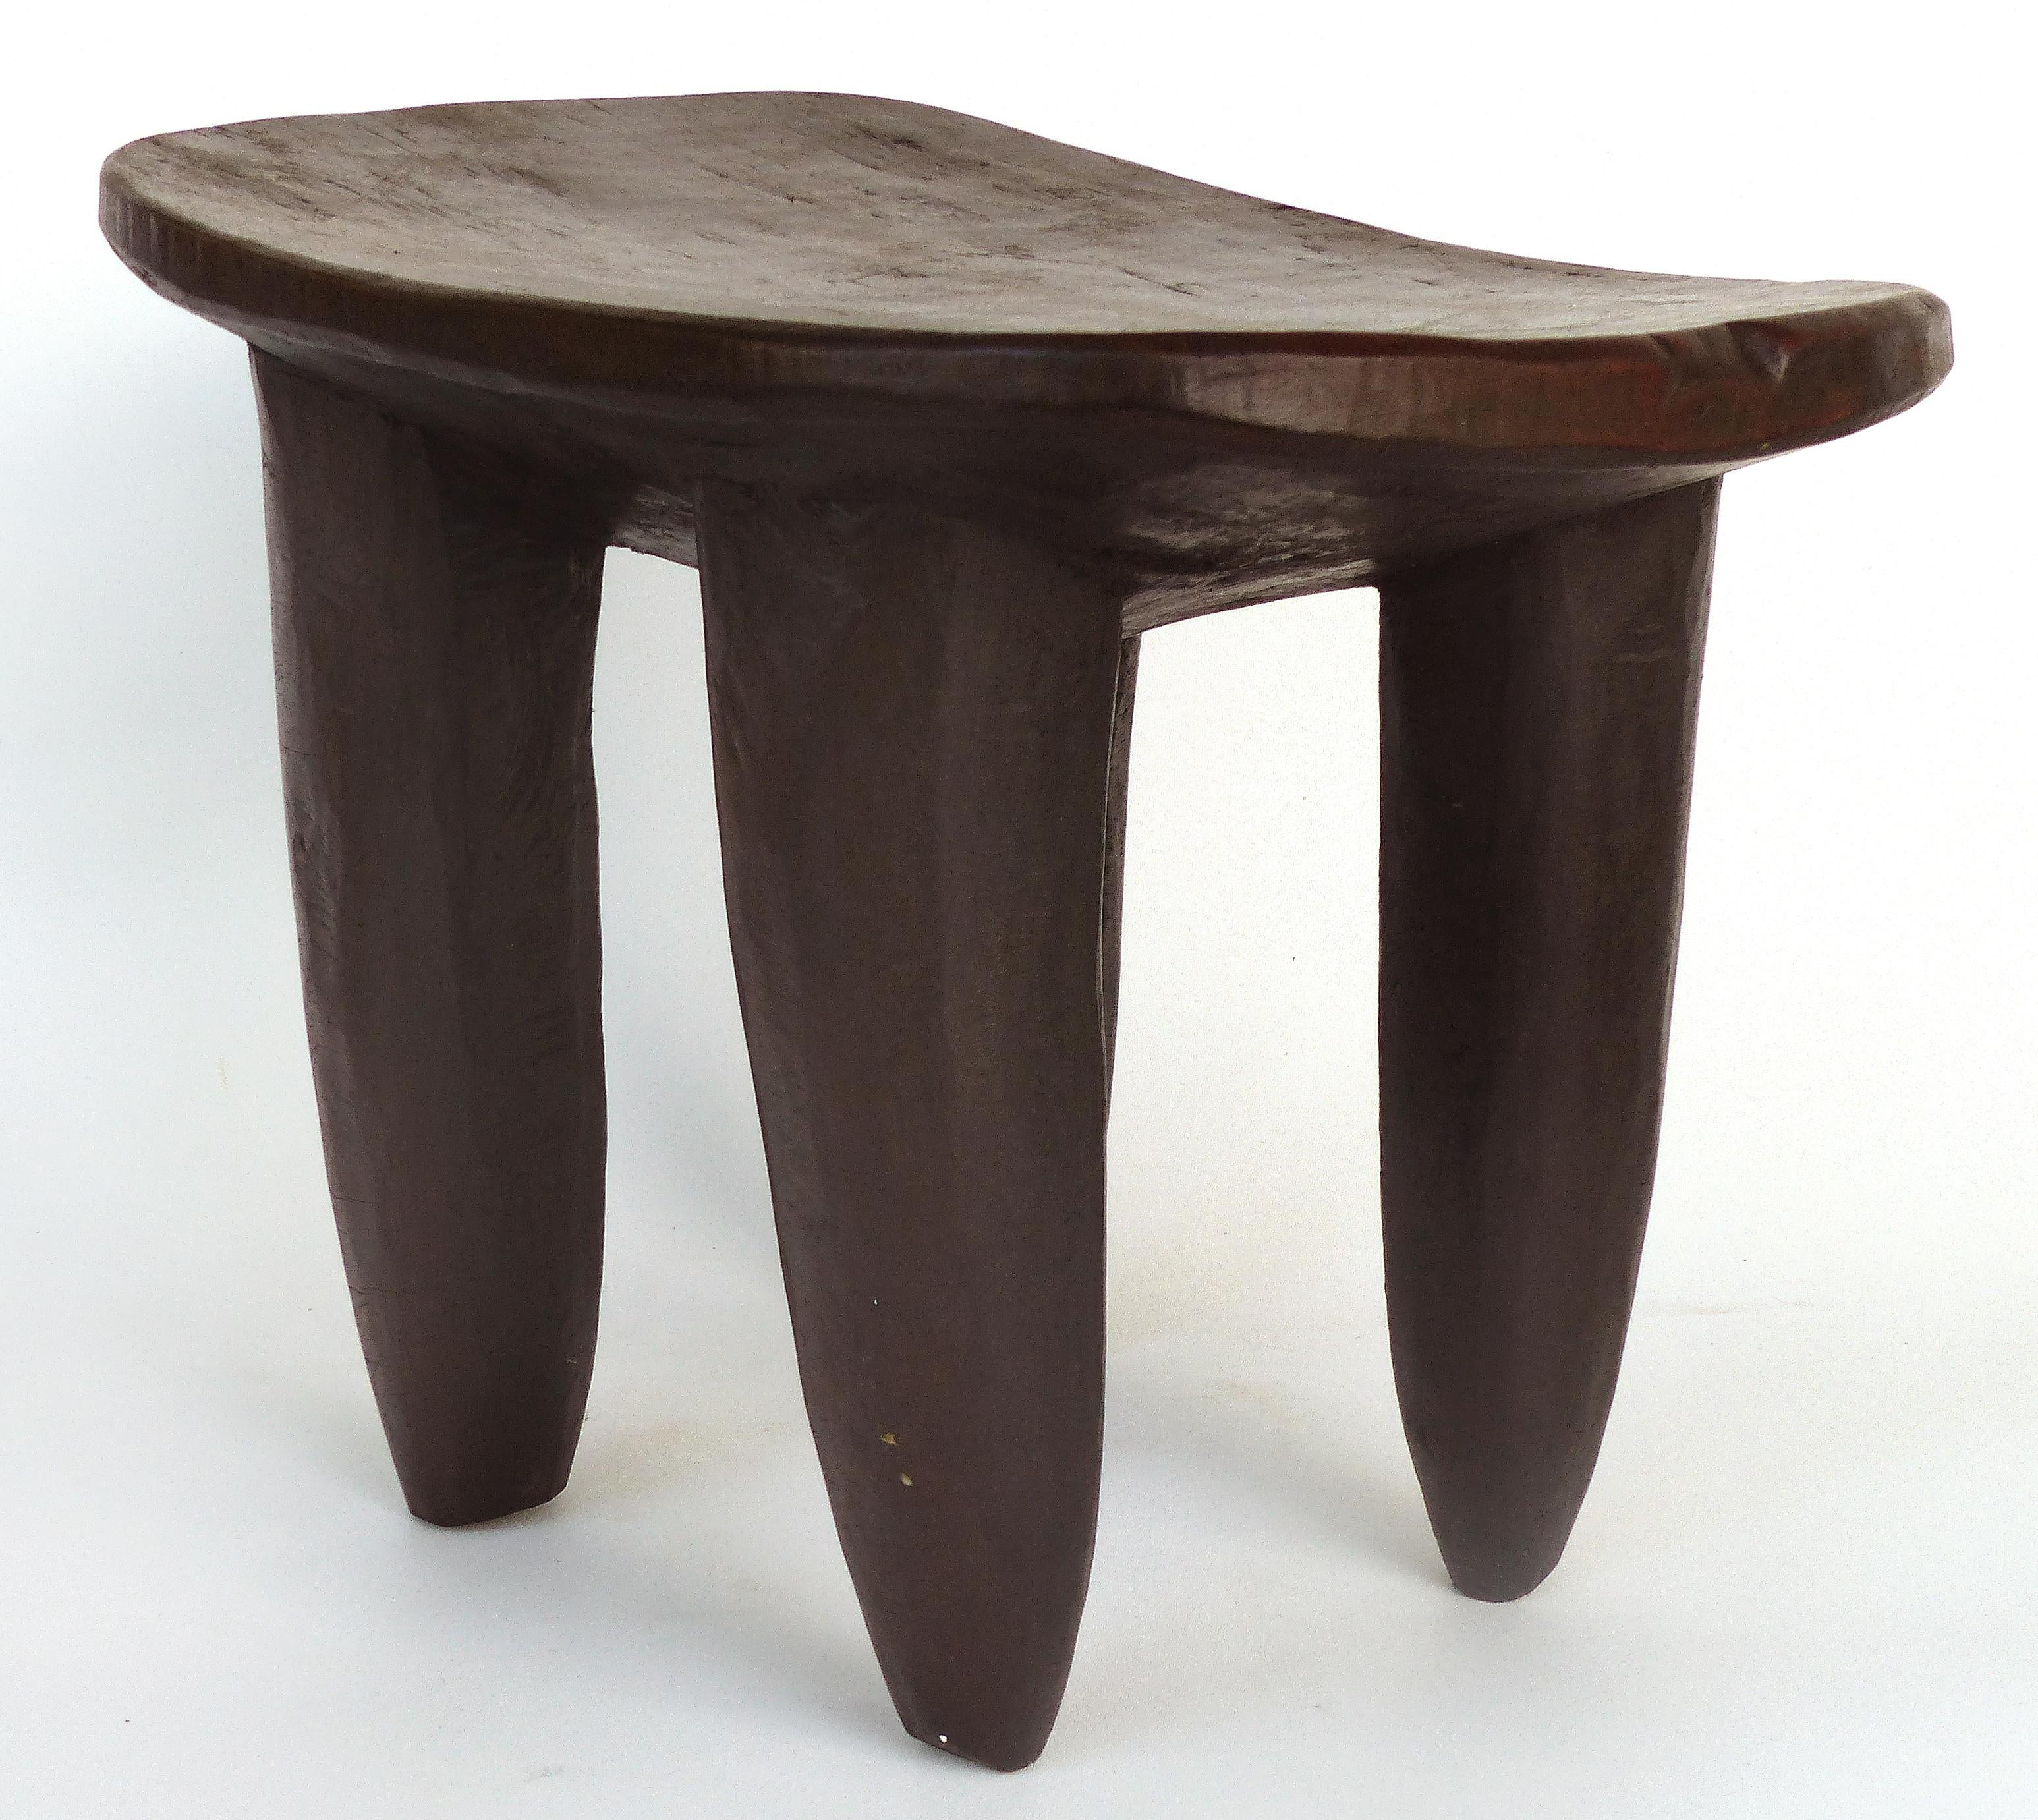 Ivorian African Hand-Carved Stool from Cote d'Ivoire